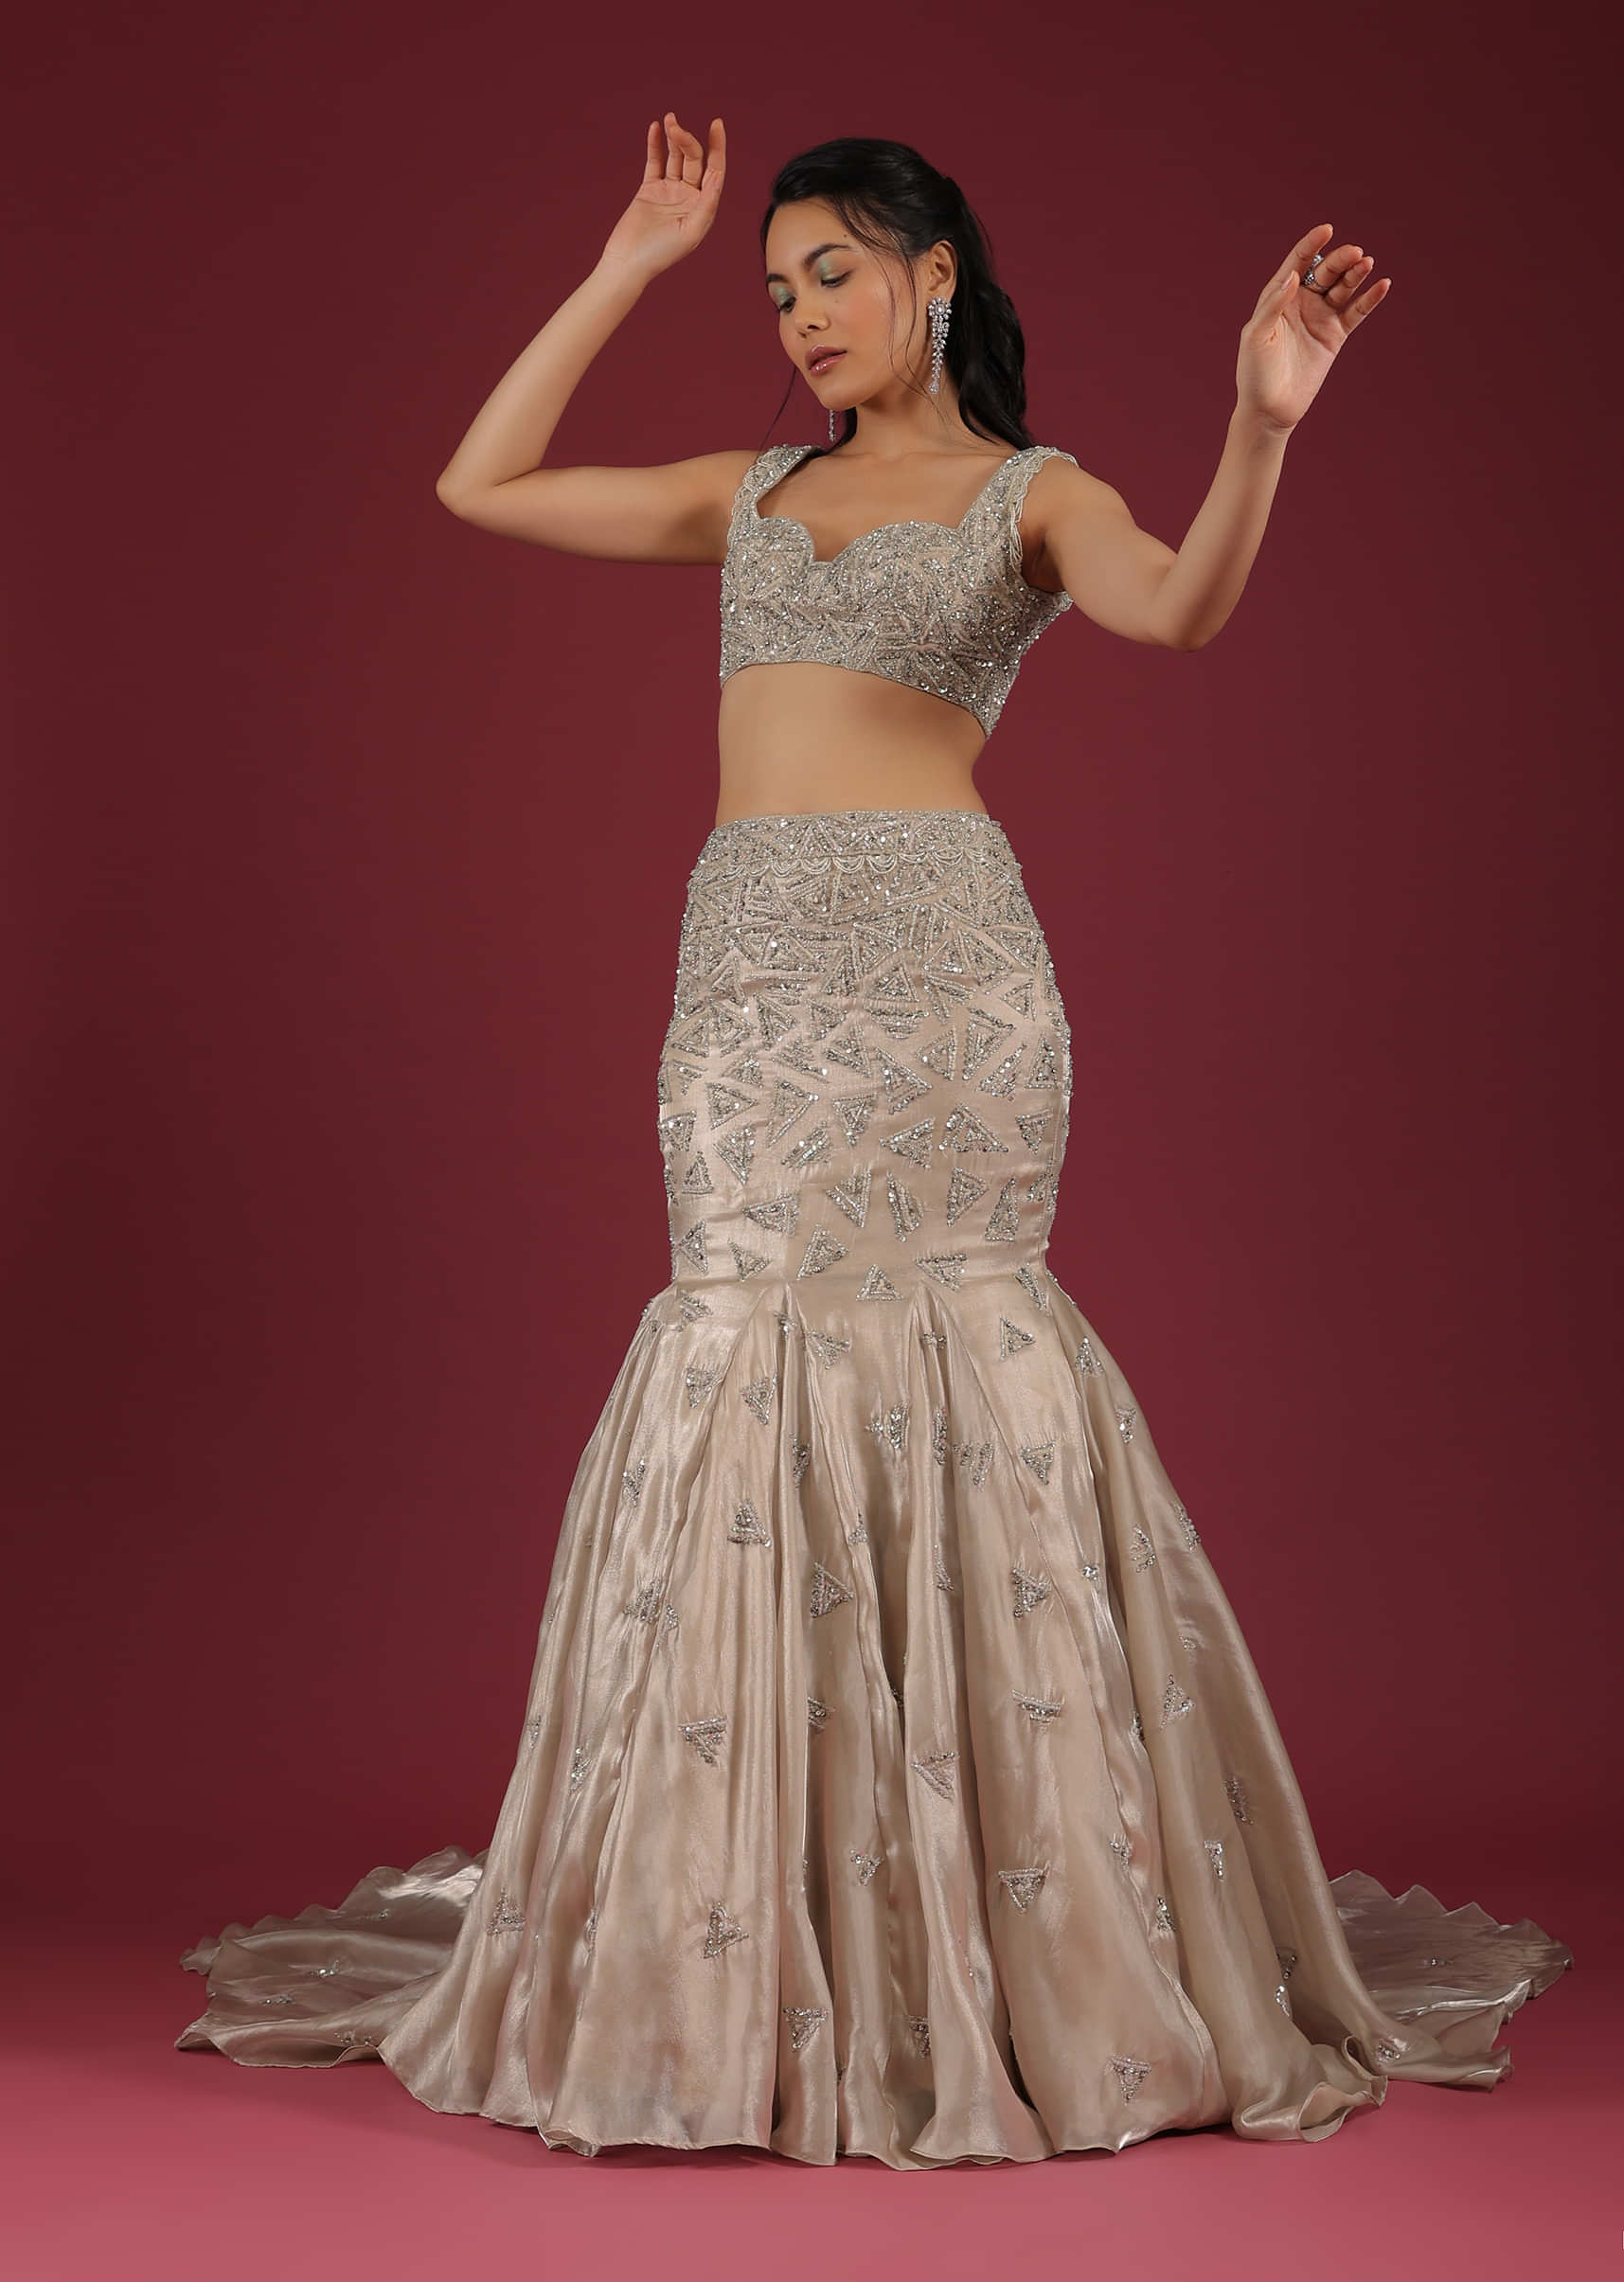 Organza Oyster Mermaid Lehenga With A Stone Motif Veil And Crop Top